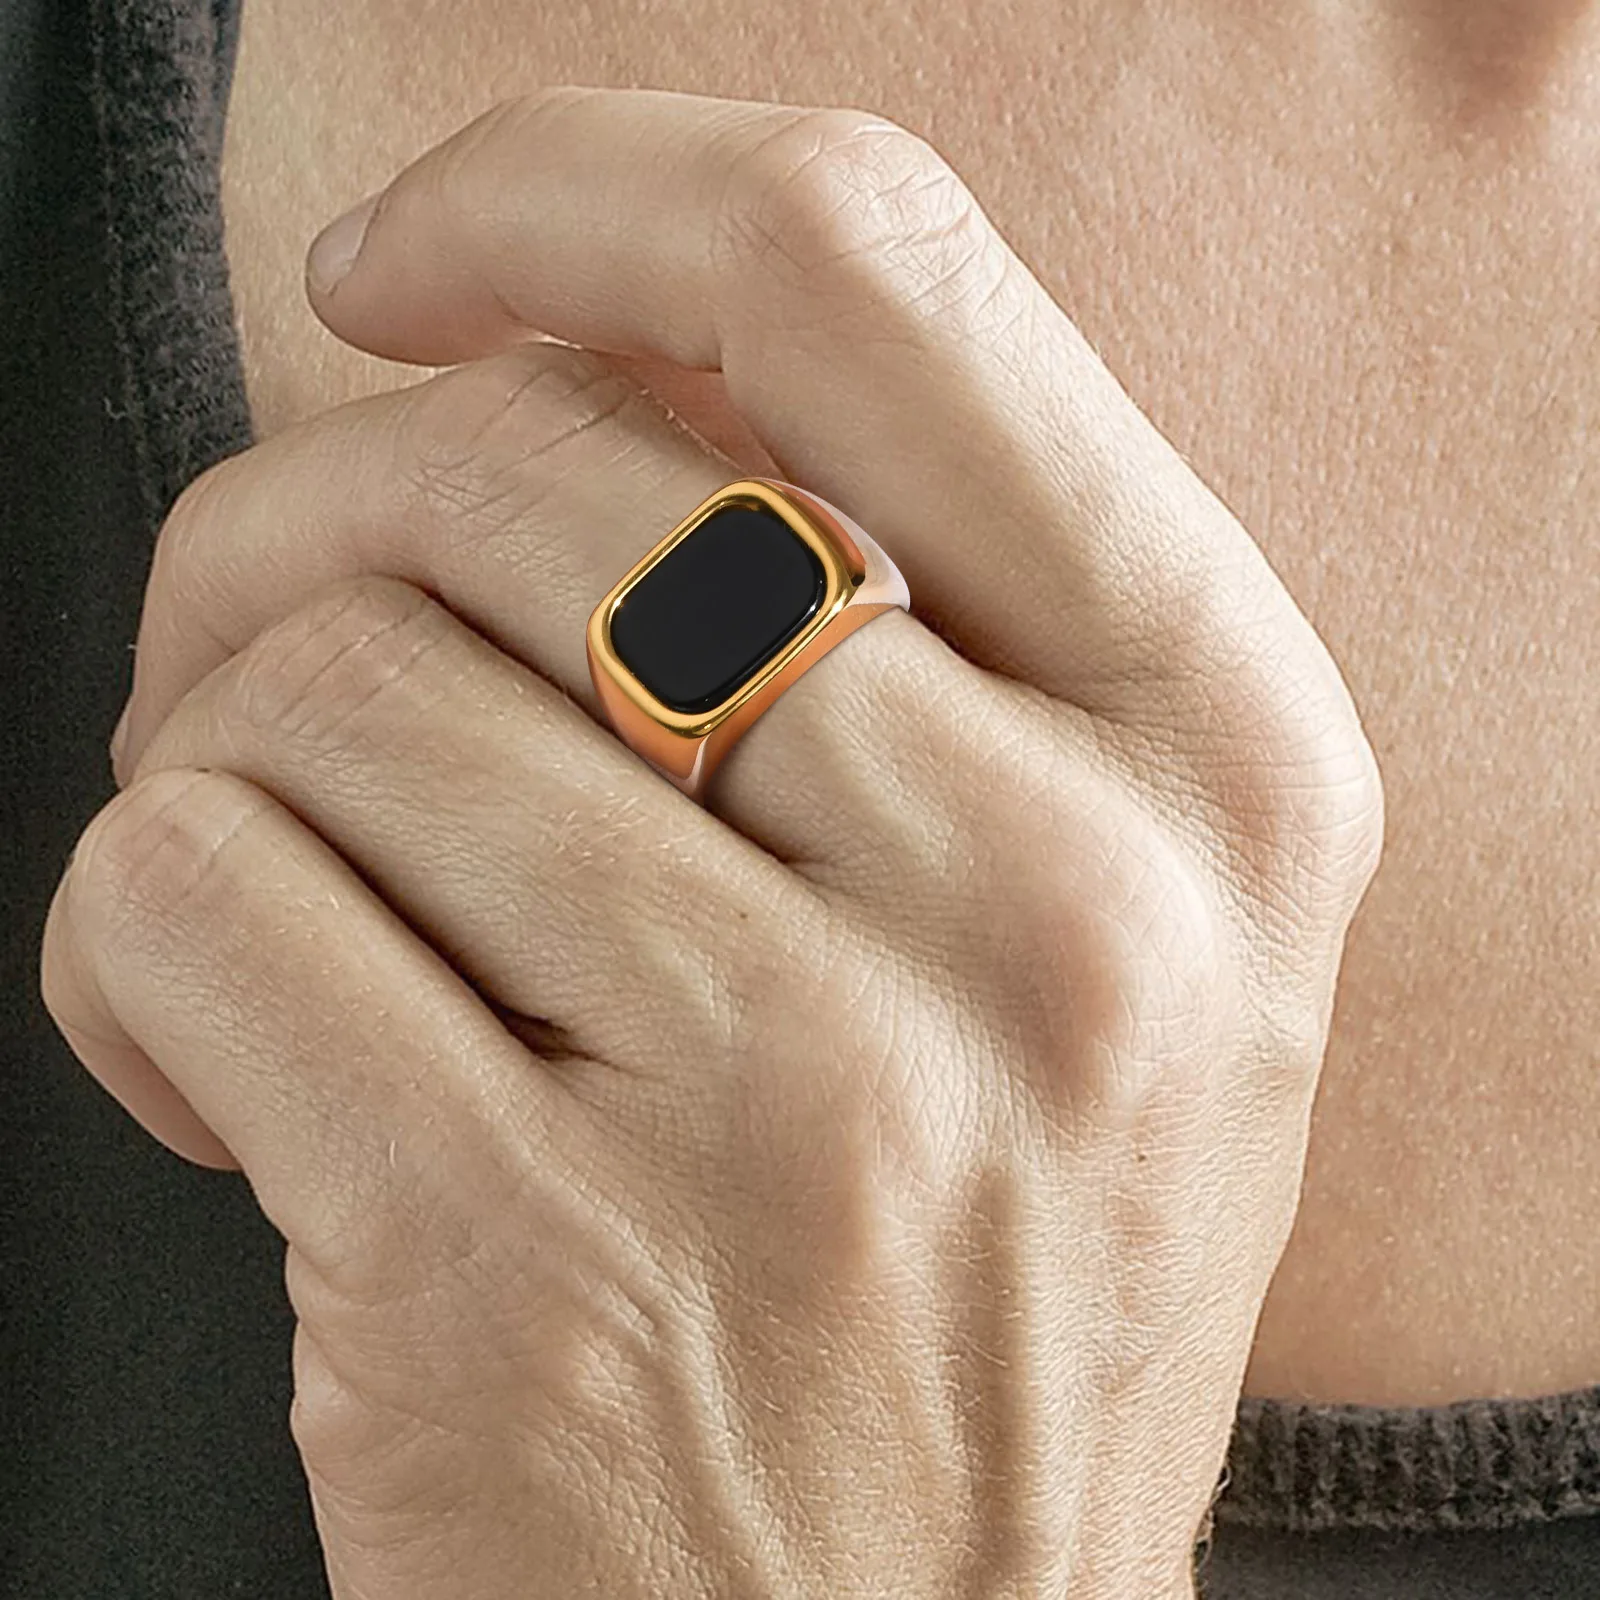 

New Fashion Signet Rings for Men, Geometric Rectangle Black Stone Top Ring, Waterproof Gold Color Stainless Steel Finger Bands